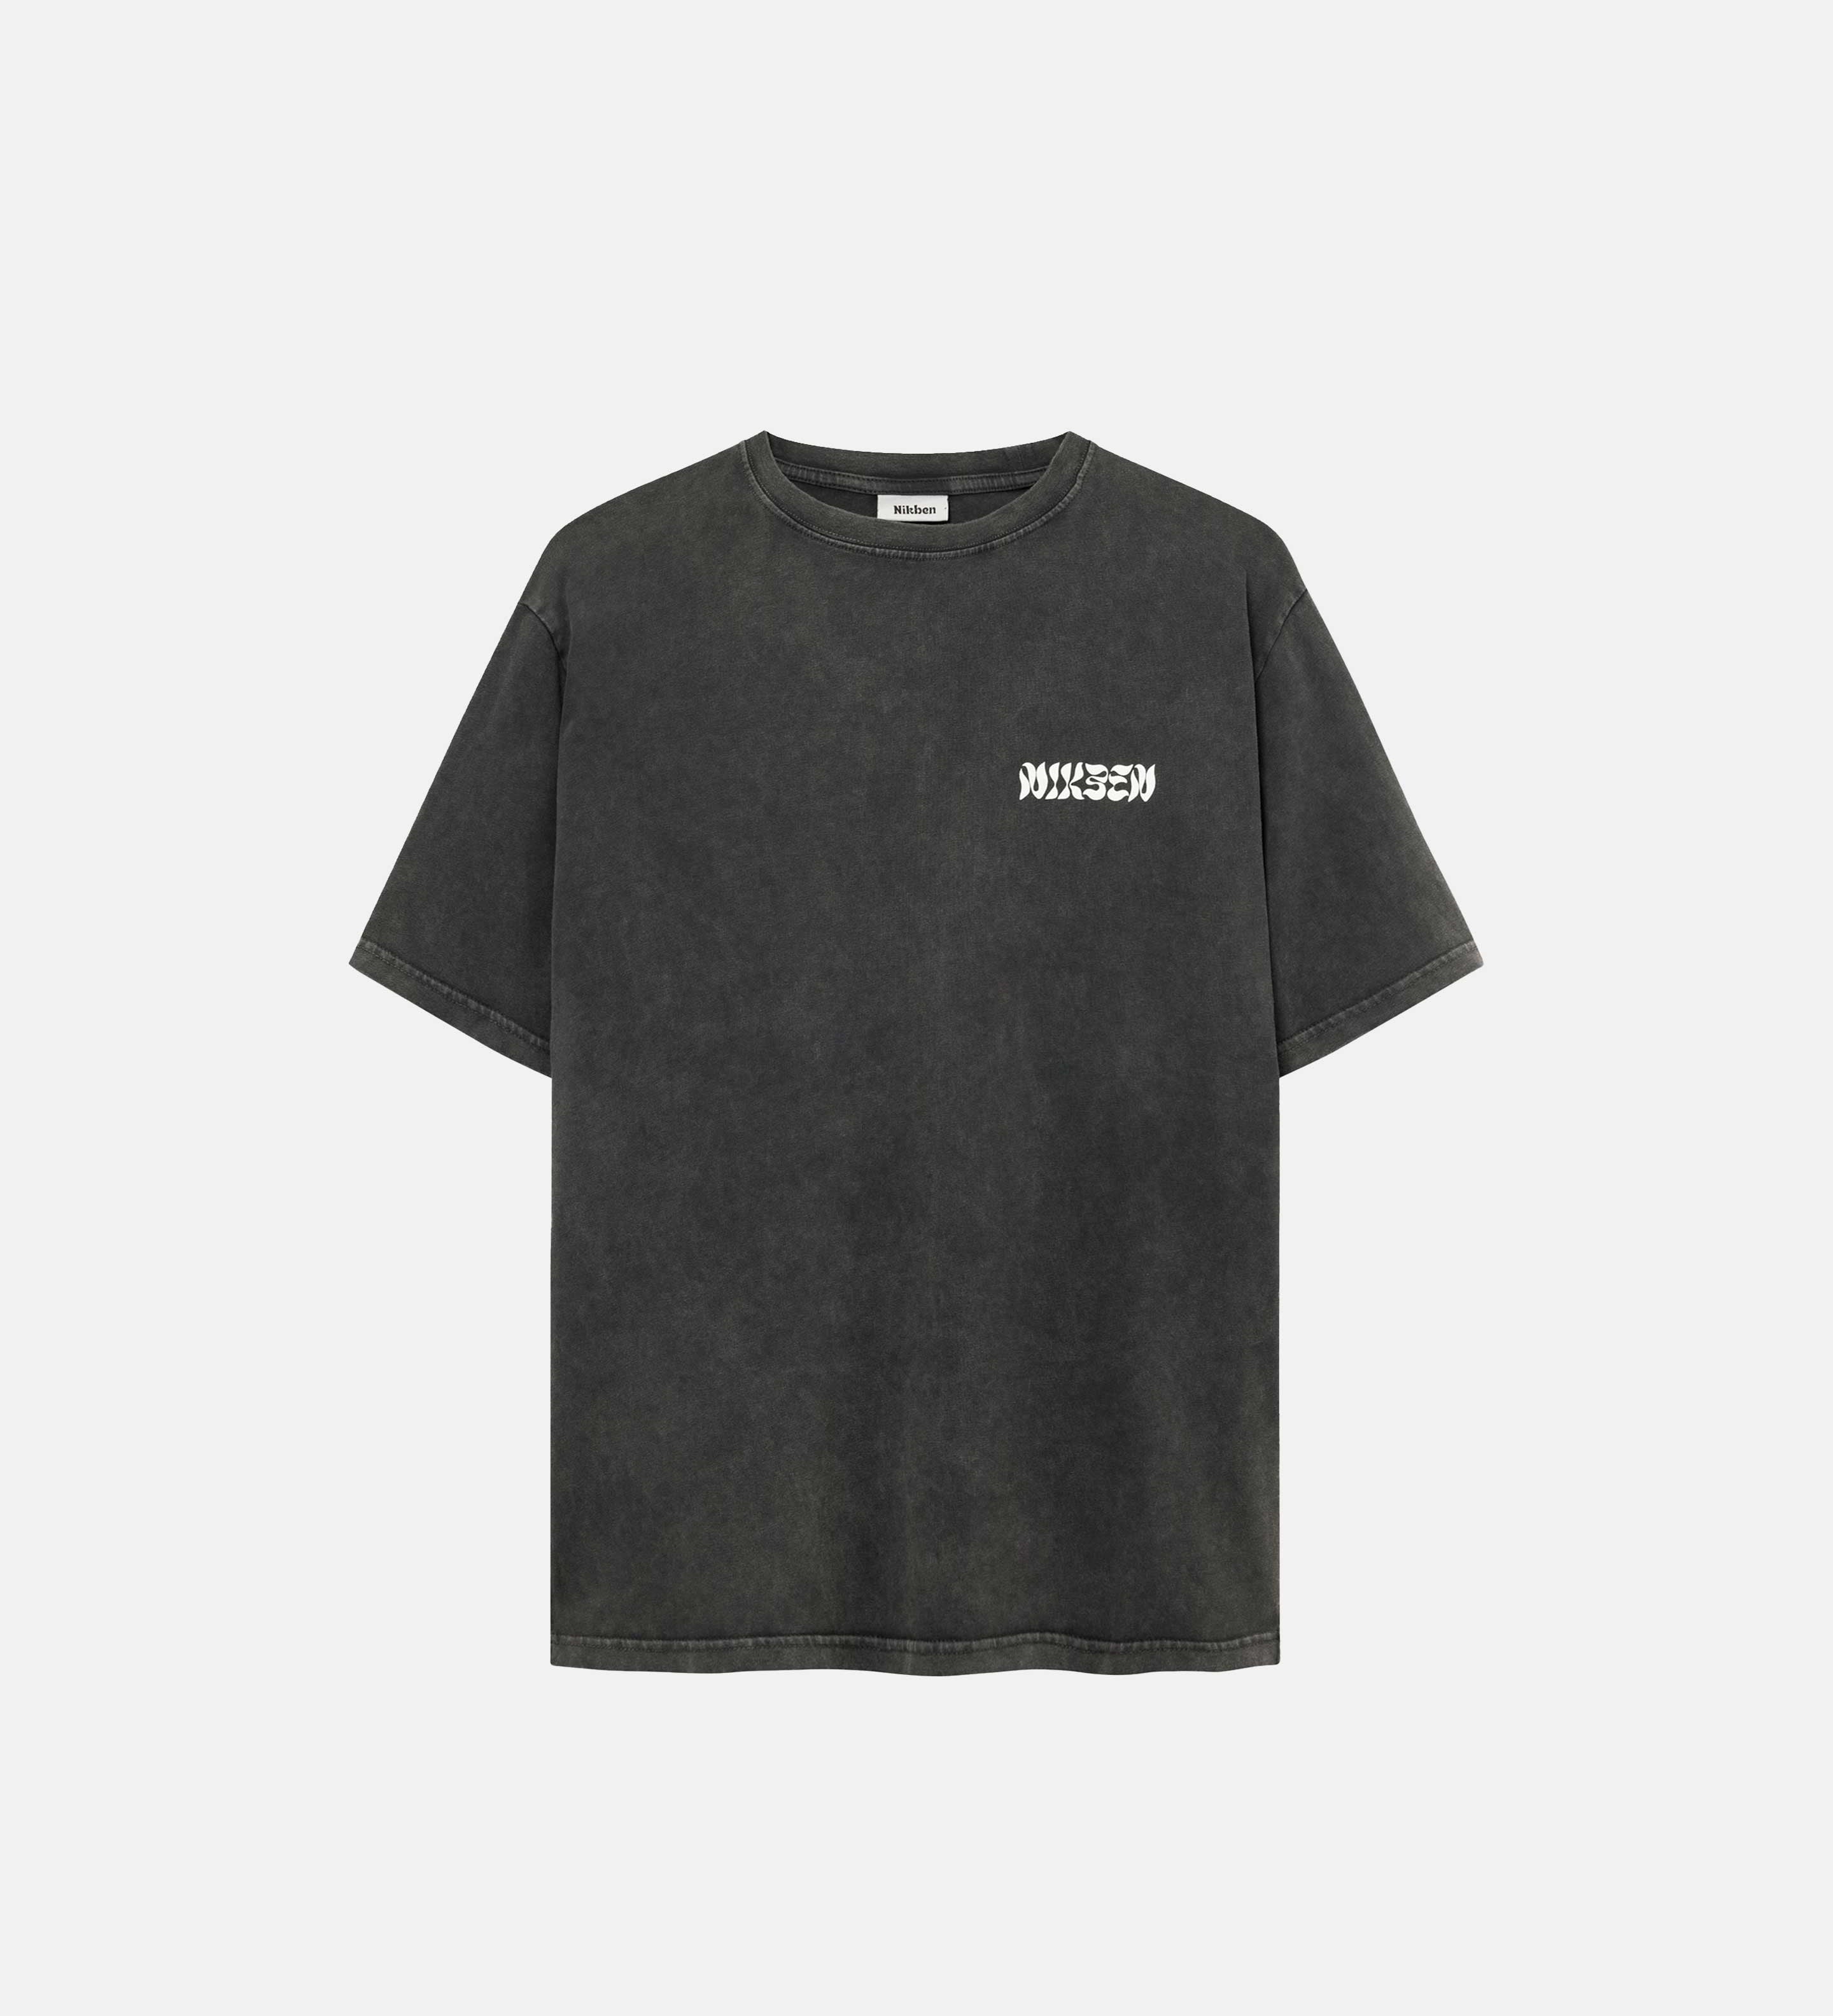 Washed black t-shirt with white logo on the chest.